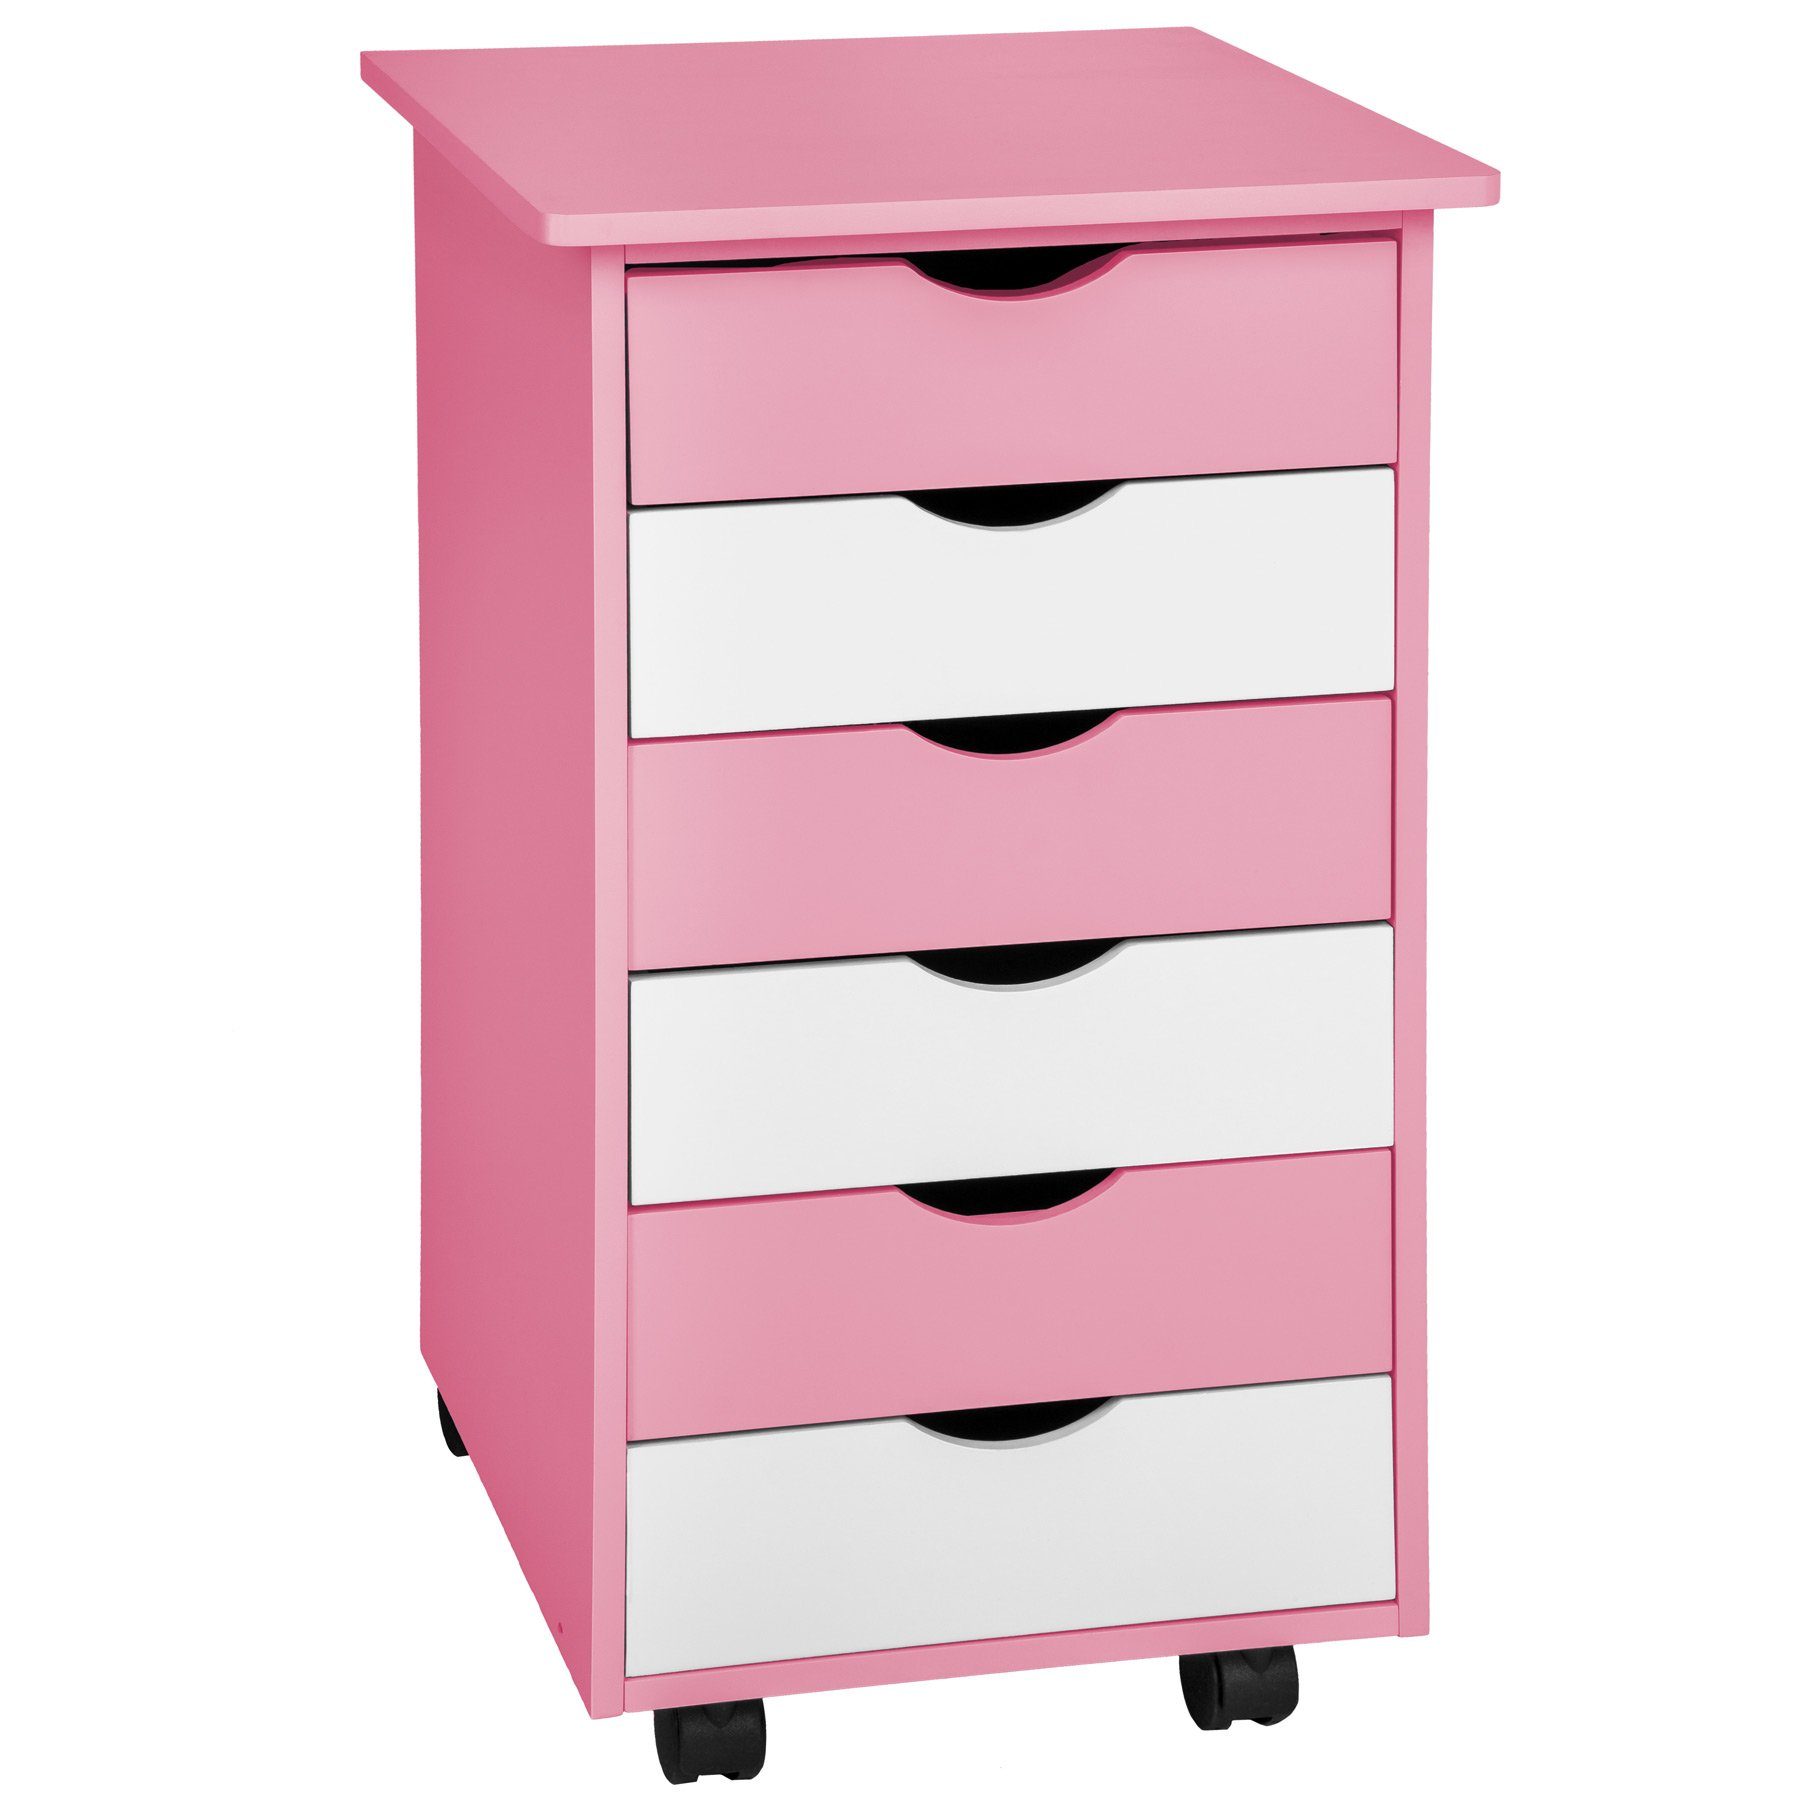 tectake Rollcontainer Rollcontainer Holz rosa 65x36x40cm aus